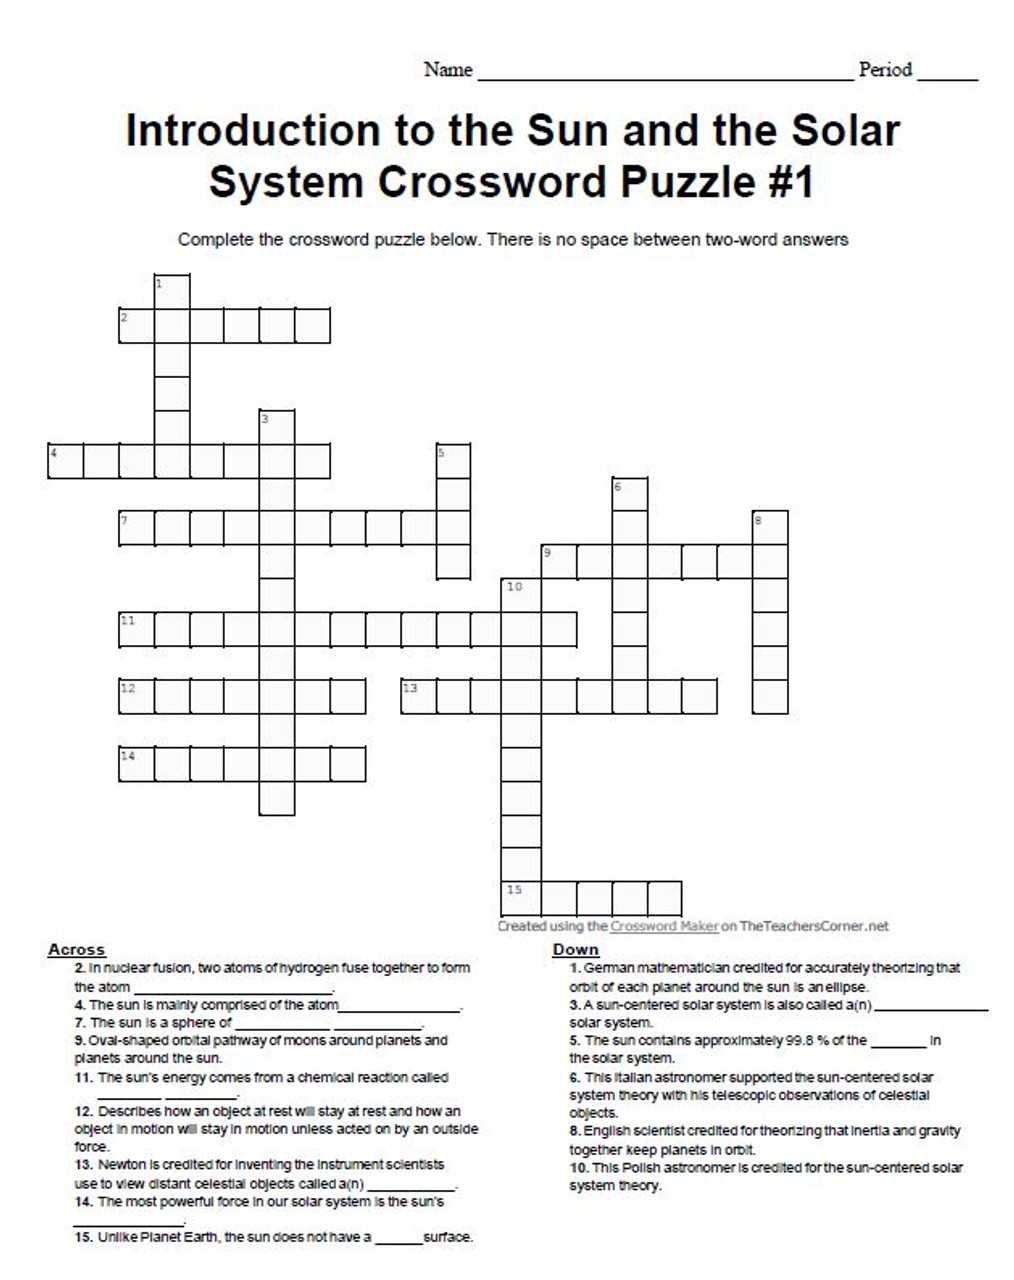 Introduction to the Sun and the Solar System Crossword Puzzle Set